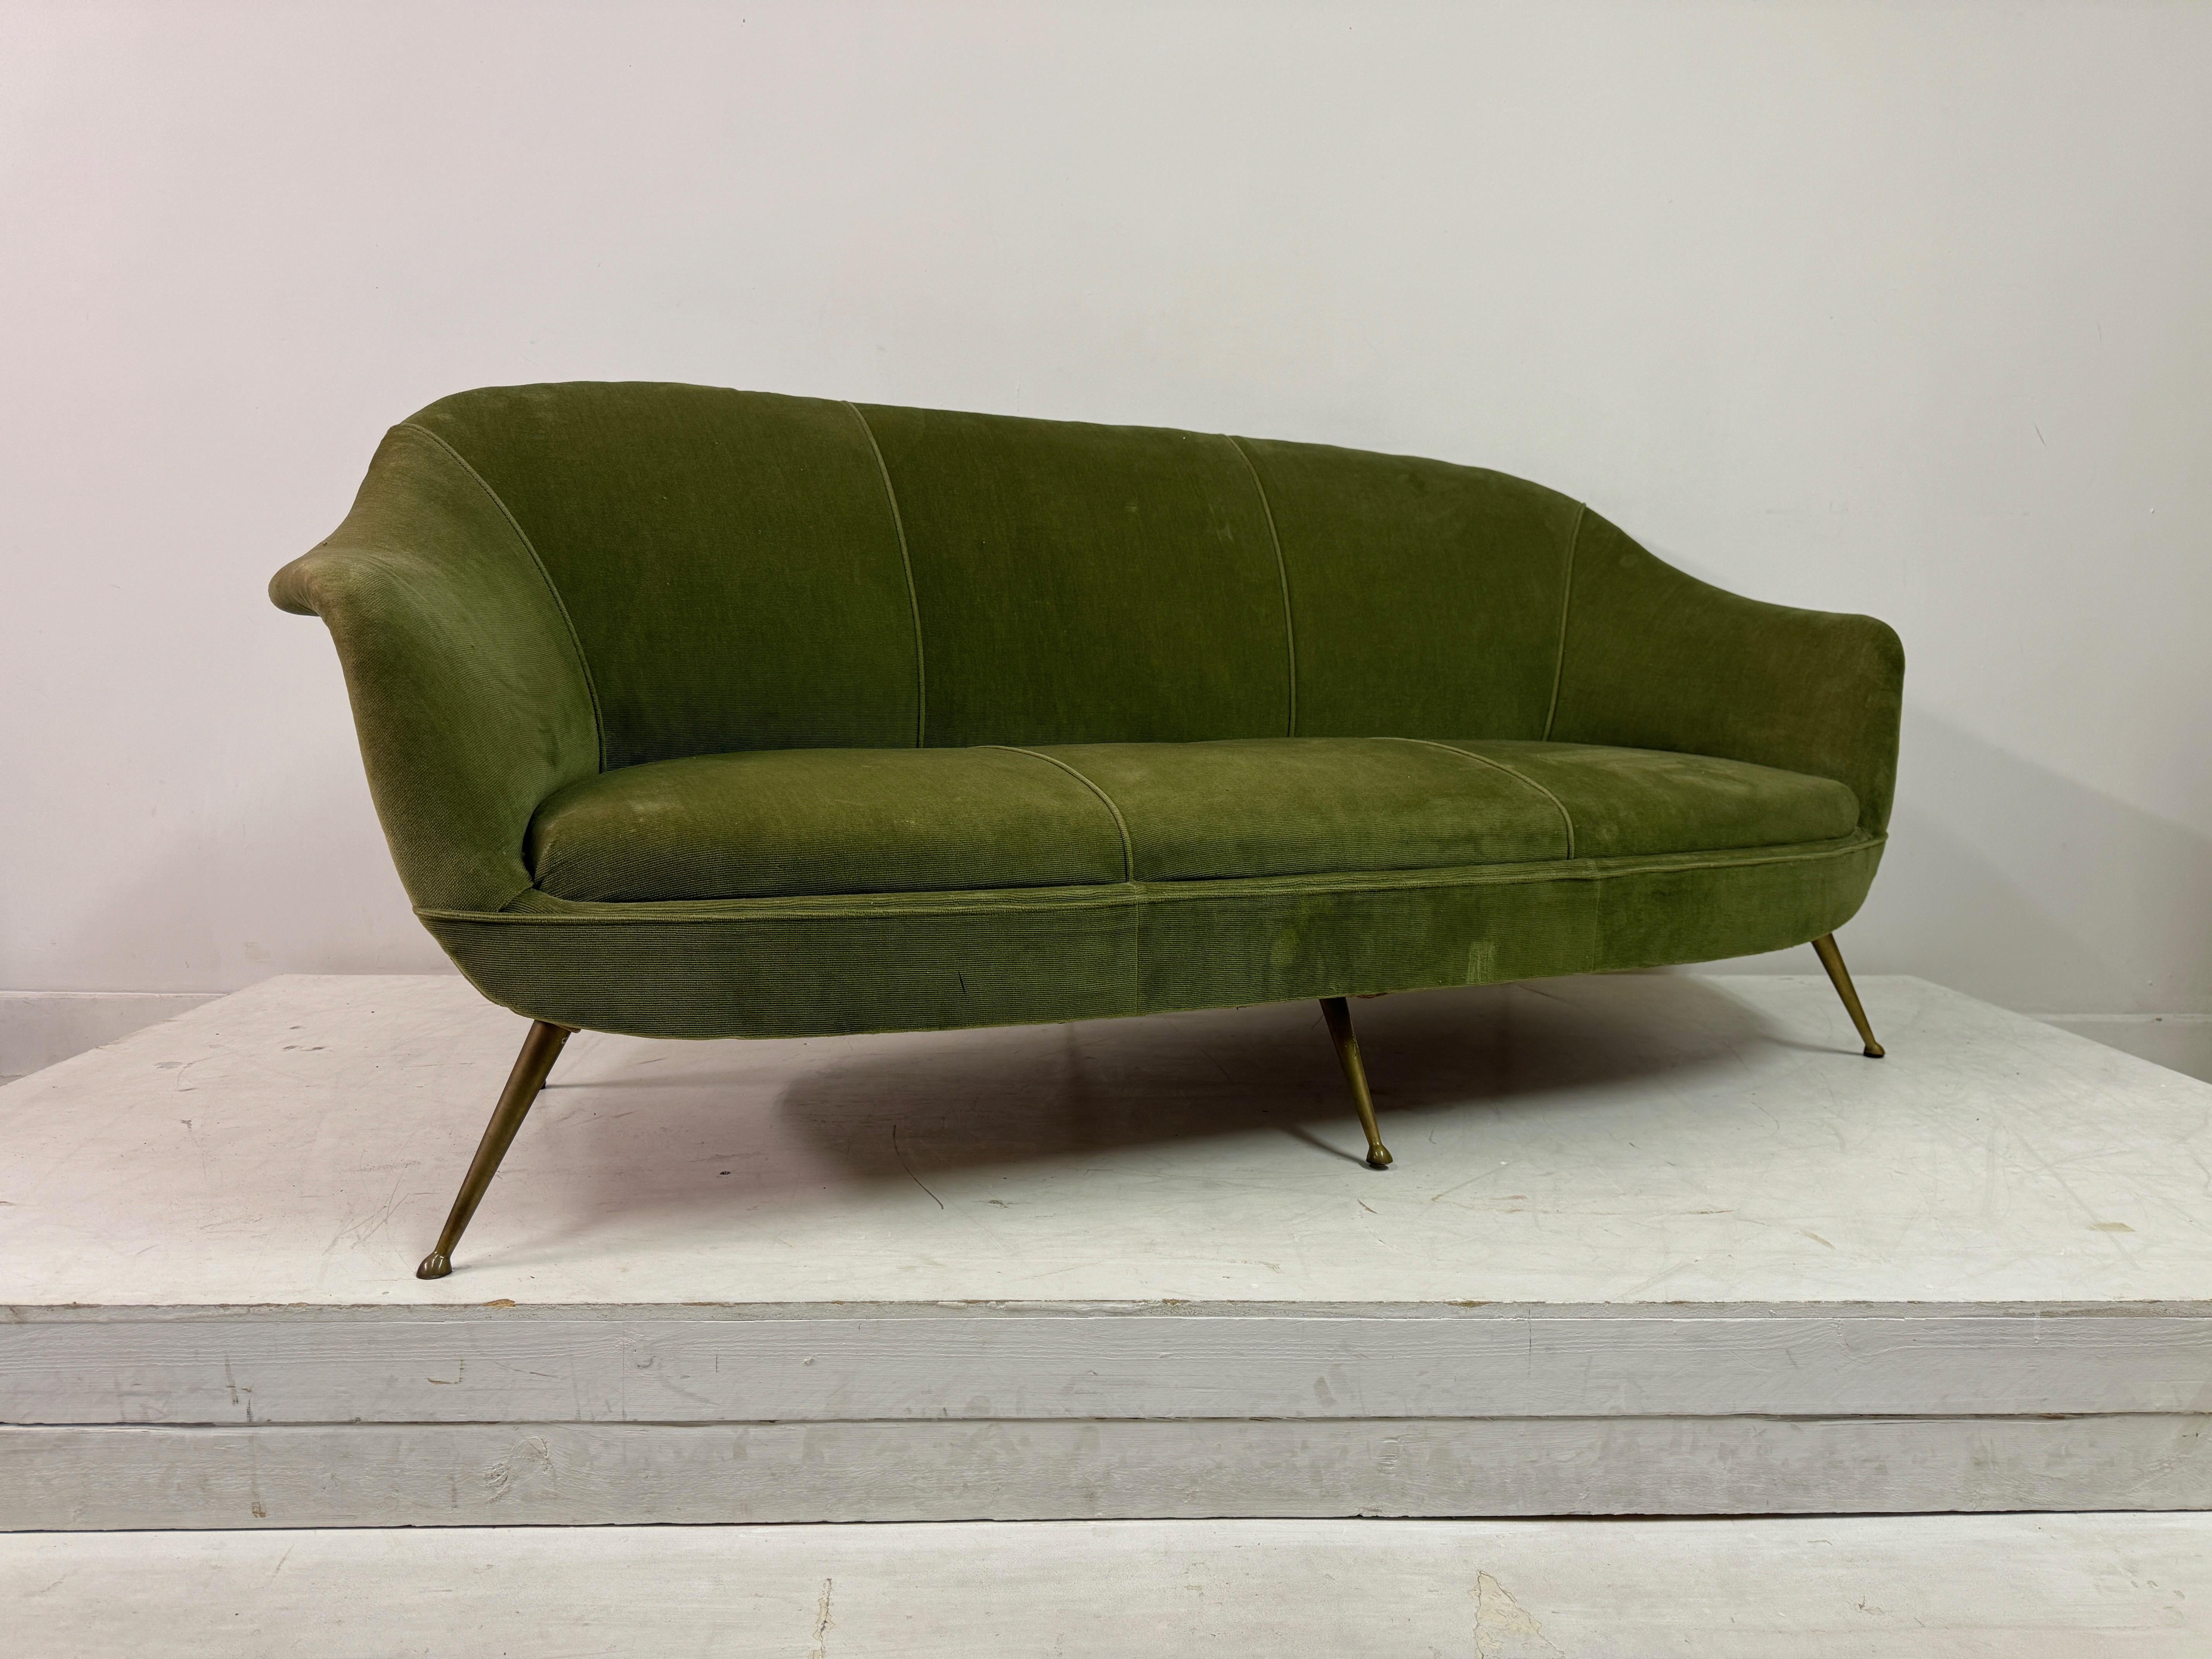 1960s Italian Sofa With Brass Legs In Fair Condition For Sale In London, London